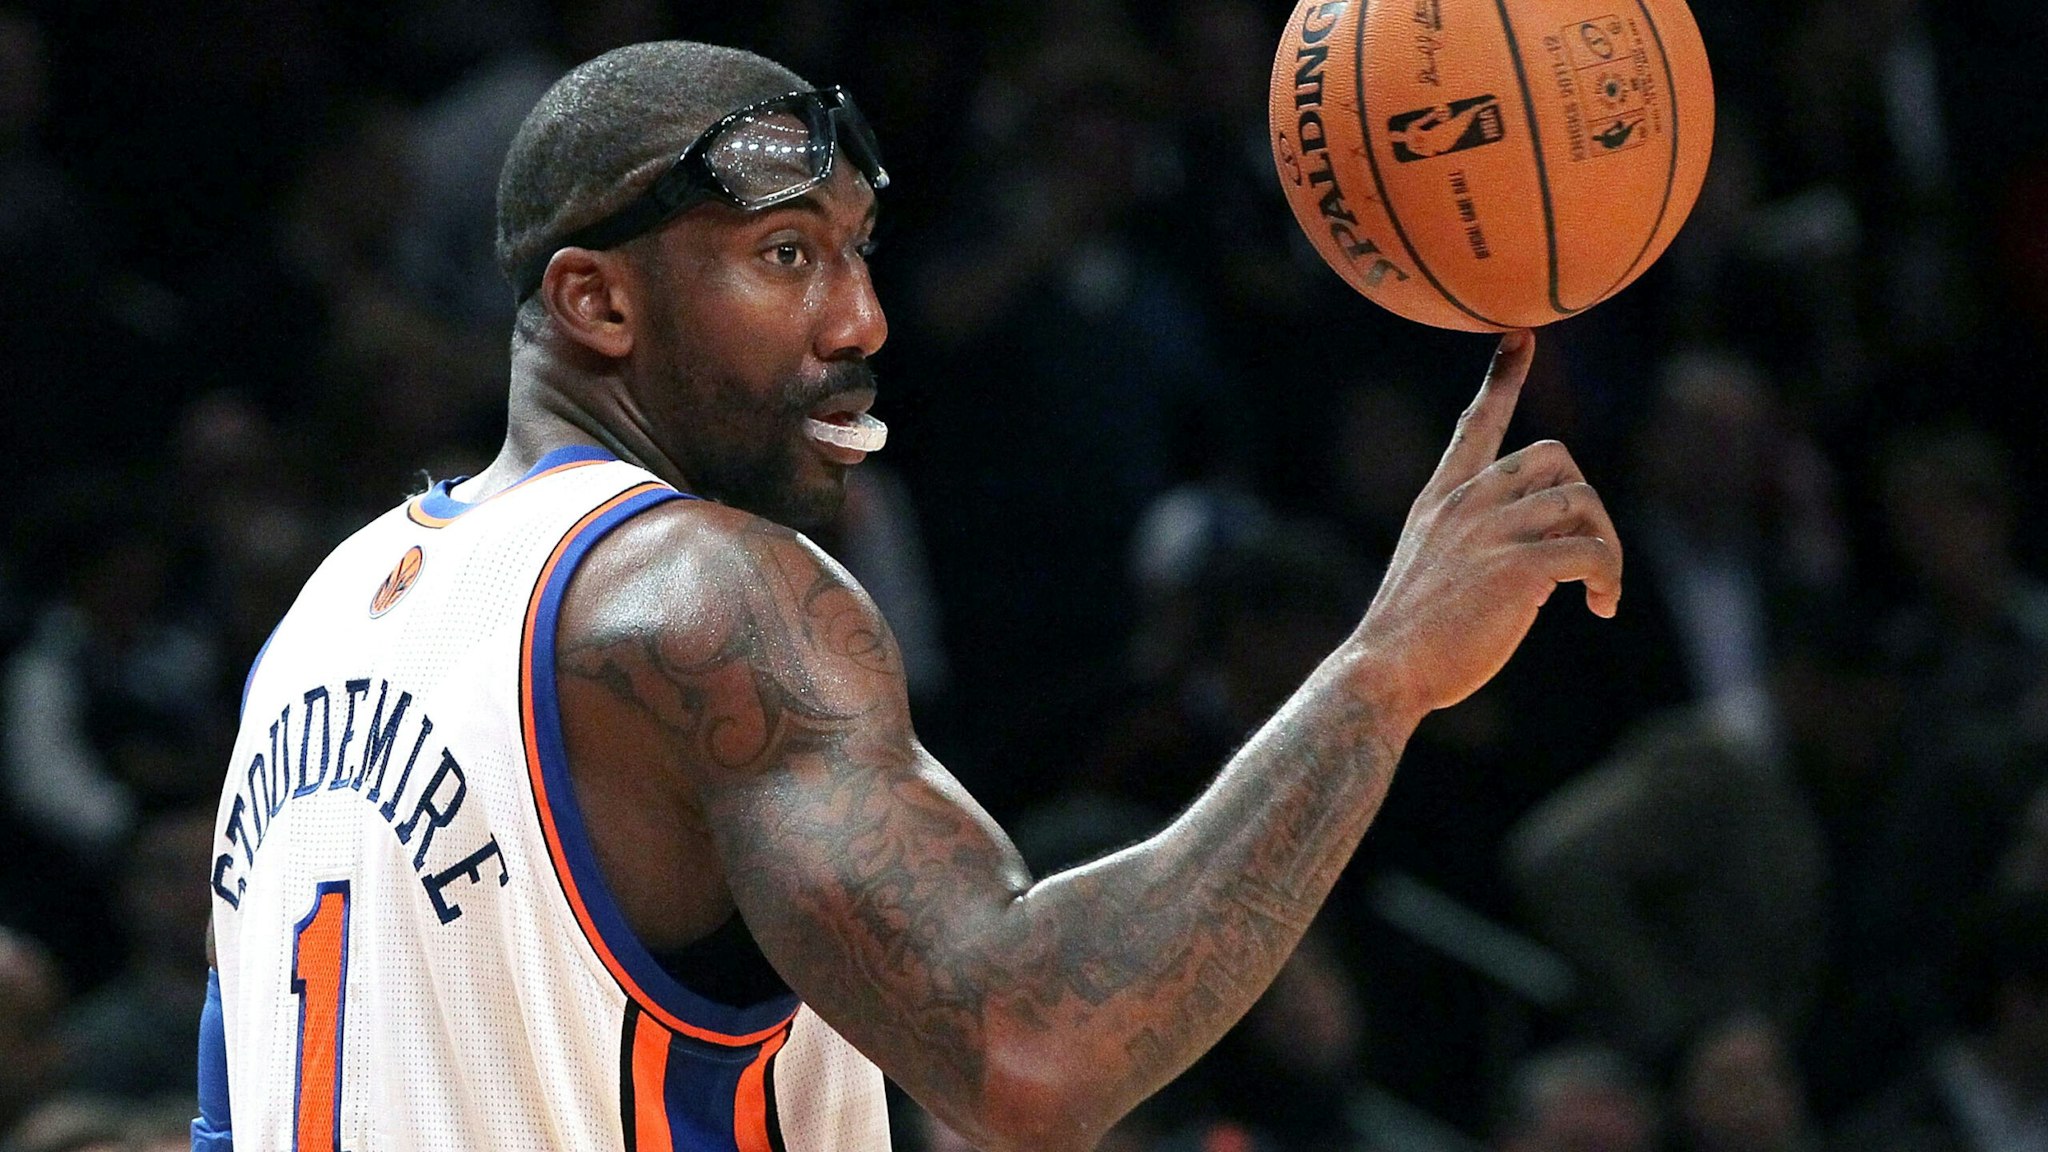 NEW YORK, NY - JANUARY 18: (NEW YORK DAILIES OUT) Amar'e Stoudemire #1 of the New York Knicks during a time out against the Phoenix Suns on January 18, 2012 at Madison Square Garden in New York City. The Suns defeated the Knicks 91-88.